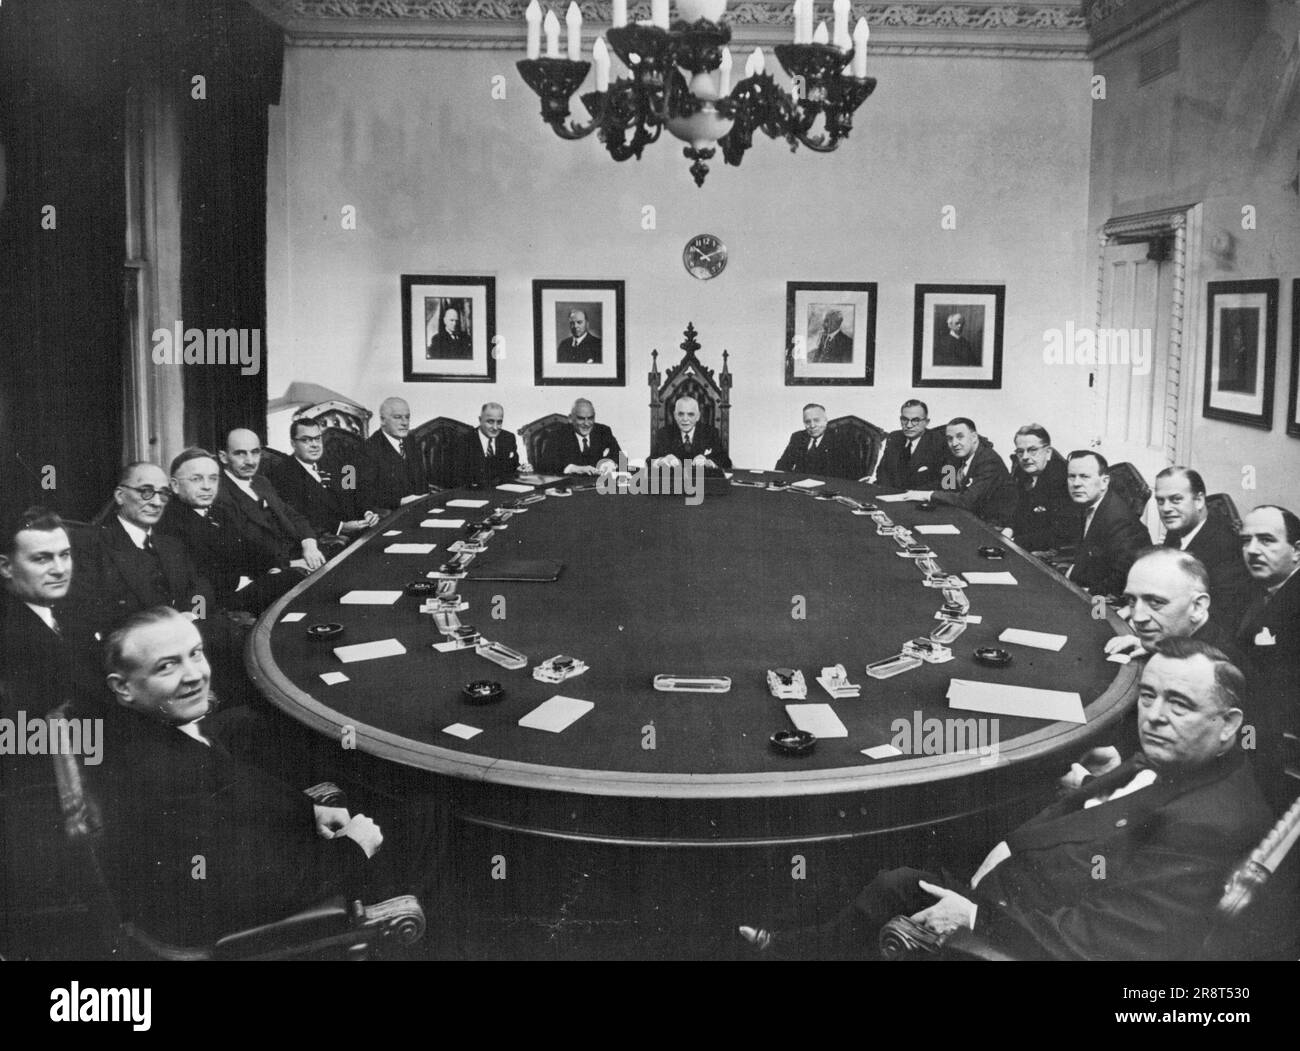 The Canadian Cabinet - Clockwise from bottom left hand corner:- Alcide Cote, Postmaster General; Walter Harris, Minister of Citizenship and Immigration; F. Gordon Bradley, Secretary of State; Stuart Garson, Minister of Justice and Attorney General; Milton Gregg, Minister of Labour; Paul Martin, Minister of National Health and Welfare; James McCann, Minister of National Revenue; Alphonse Fournier, Minister of Public Works; Clarence D. Howe, Minister of trade and Commerce and of Defence Production; Louis St. Laurent, Prime Minister and President of the Privy Council; James G. Gardiner, Mini… Stock Photo